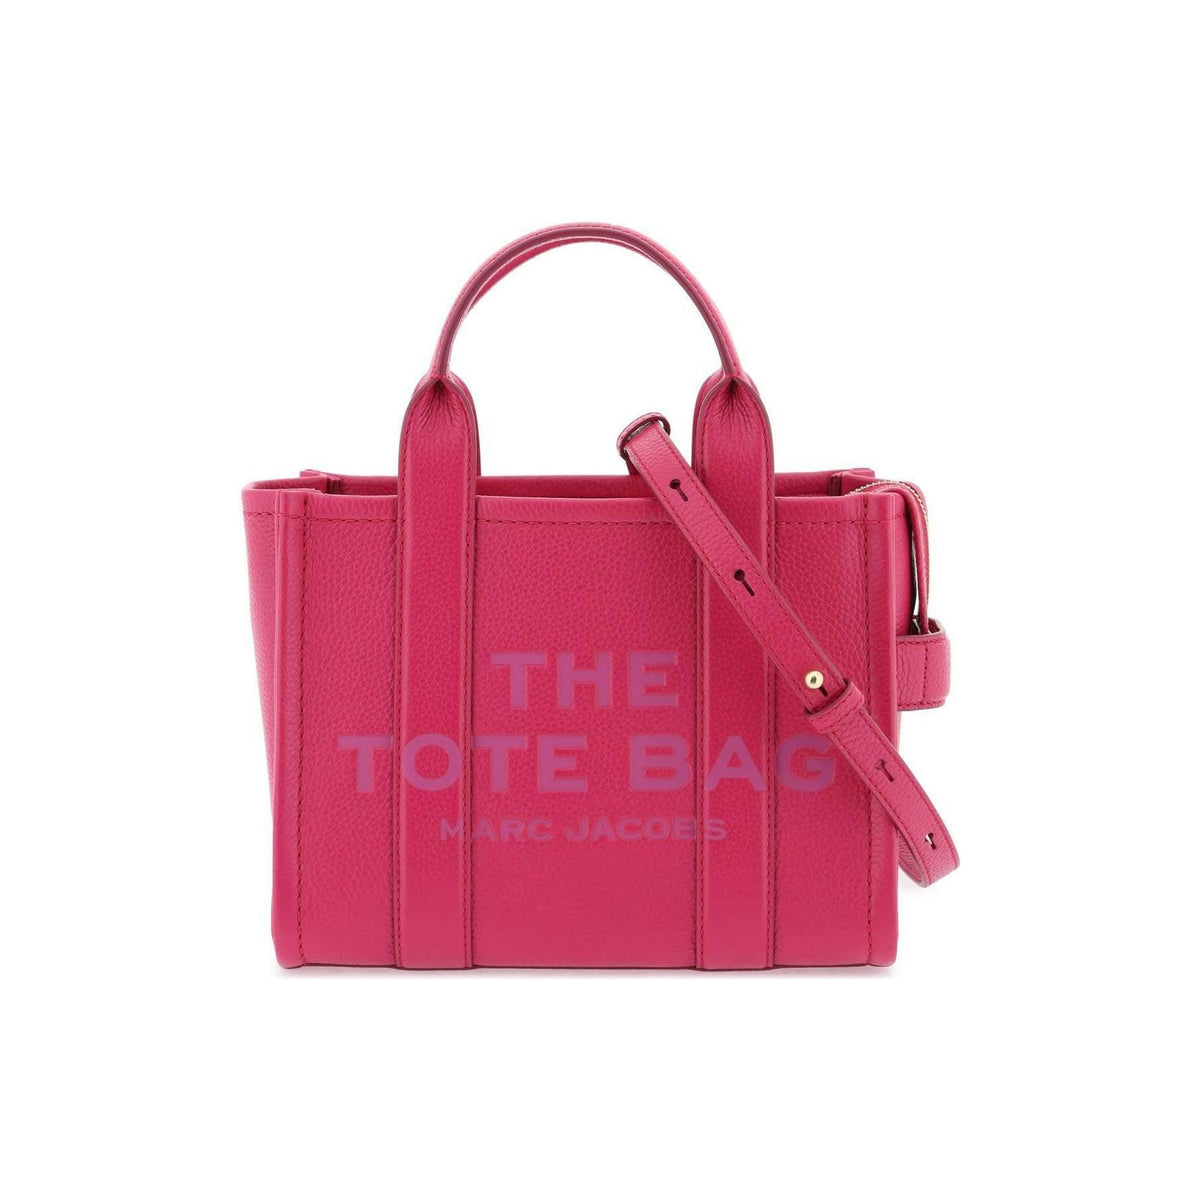 Lipstick Pink The Leather Small Tote Bag MARC JACOBS JOHN JULIA.